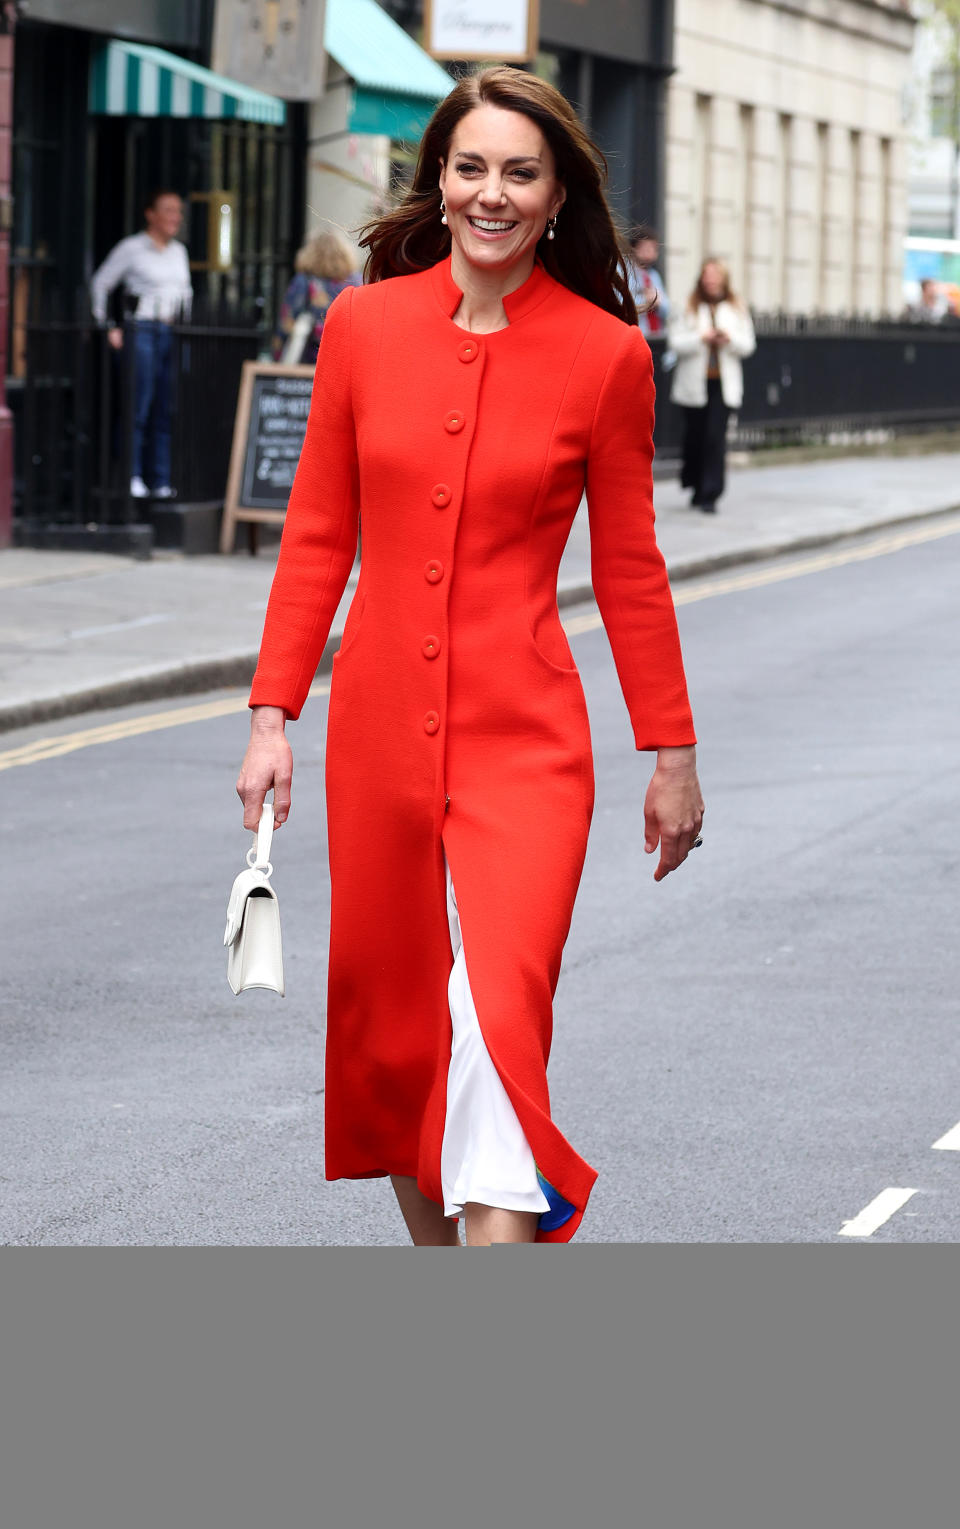 <p> Shortly before King Charles III's coronation in 2023, Kate stepped out in this pretty red Eponine London Tulip coat. It was a nice contrast with her white bag, white Jimmy Choo shoes, and white skirt or dress underneath (the buttons on the dress complemented the ones on the coat). This was their first event for the Coronation weekend, kicking off what would be a colorful and sartorially elevated weekend for Kate. </p>